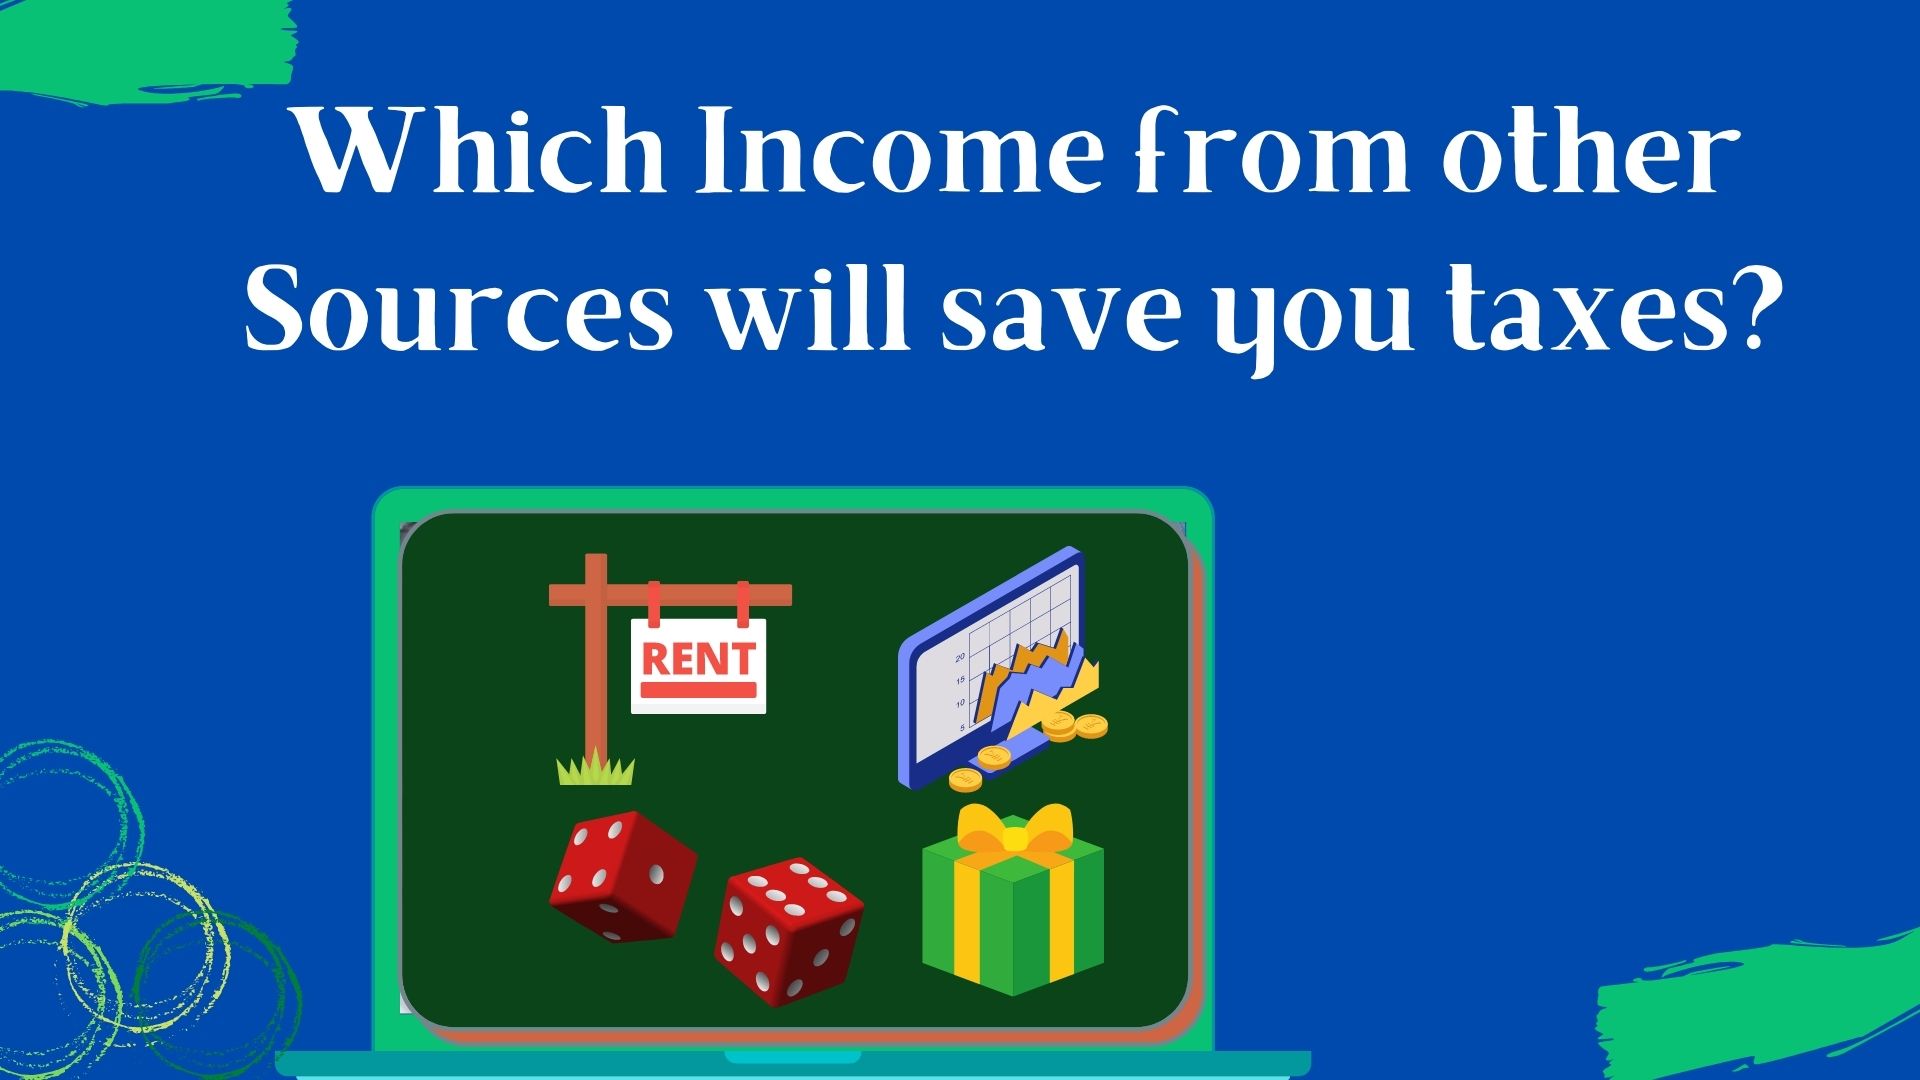 income from other sources